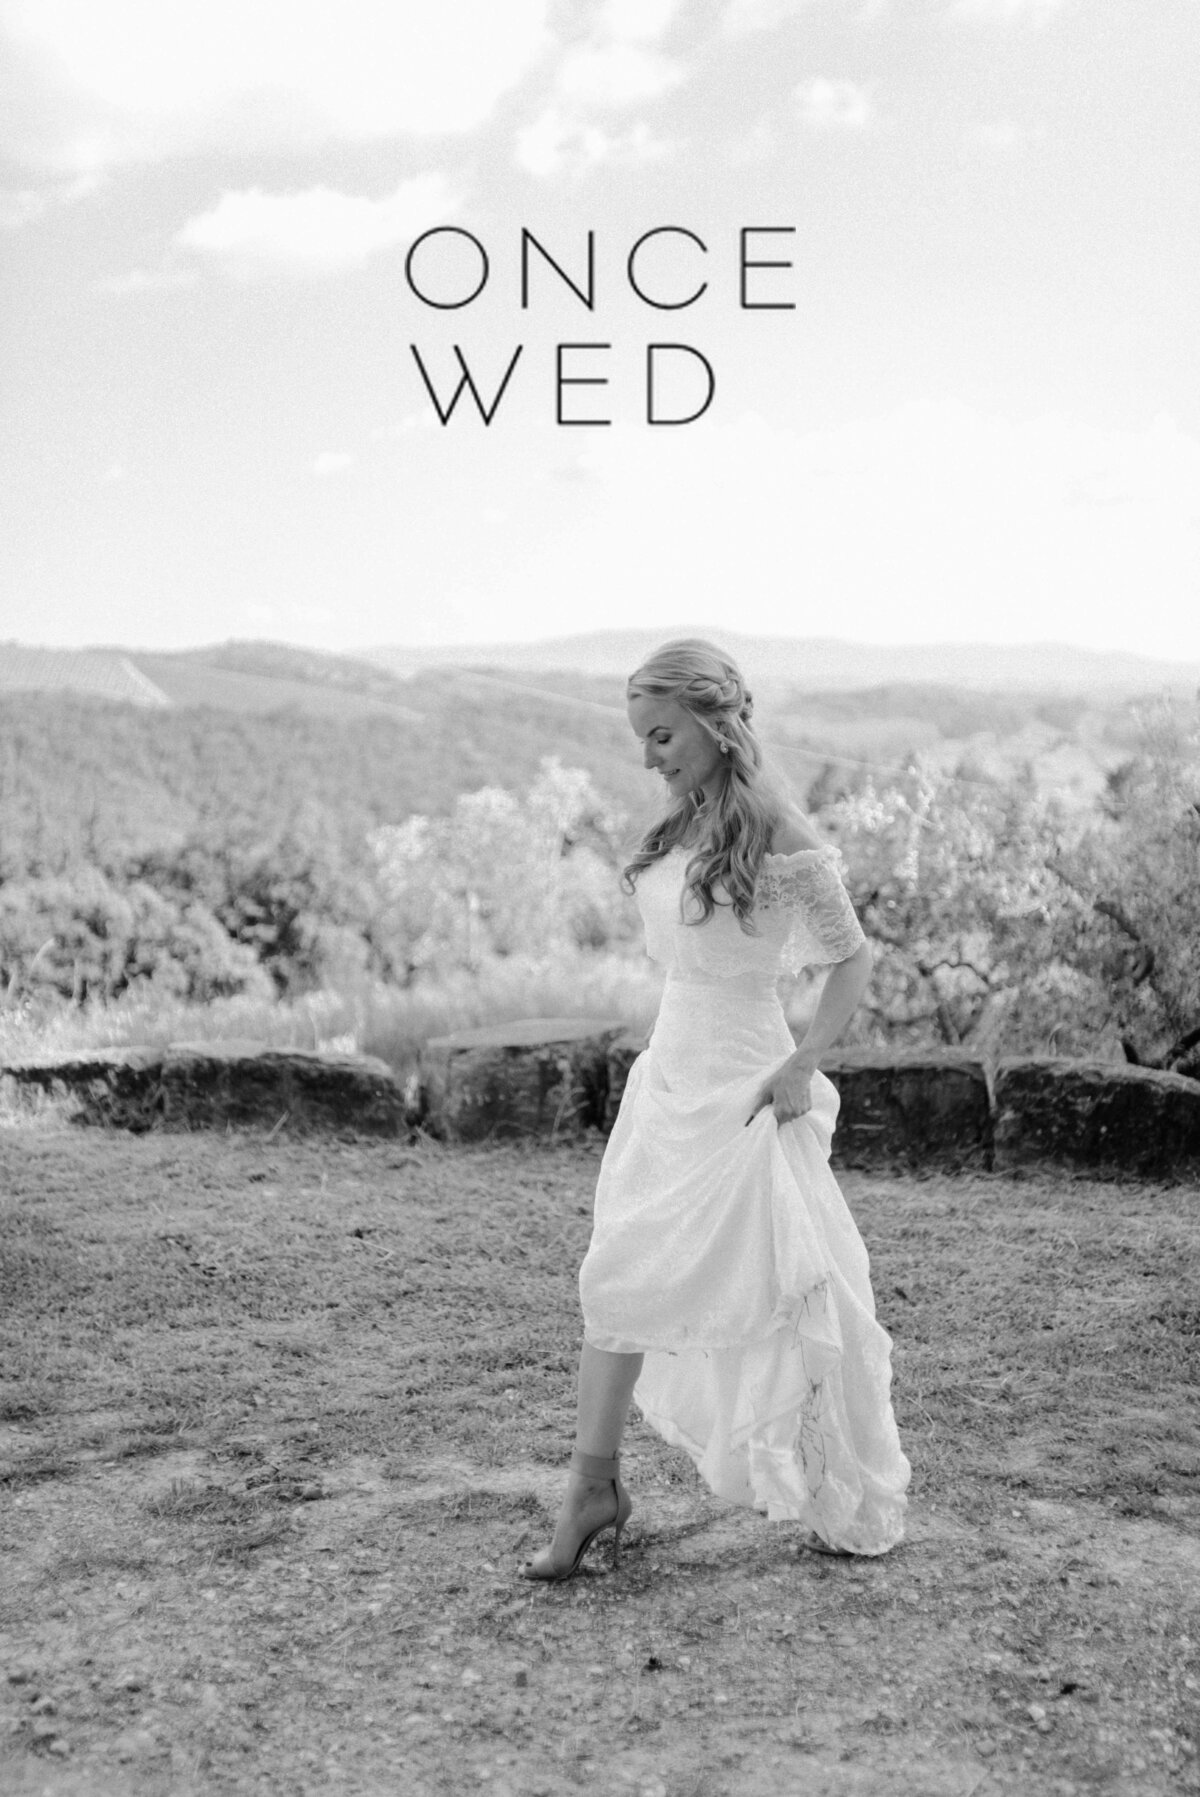 Wedding Flora and Grace featured in Once Wed